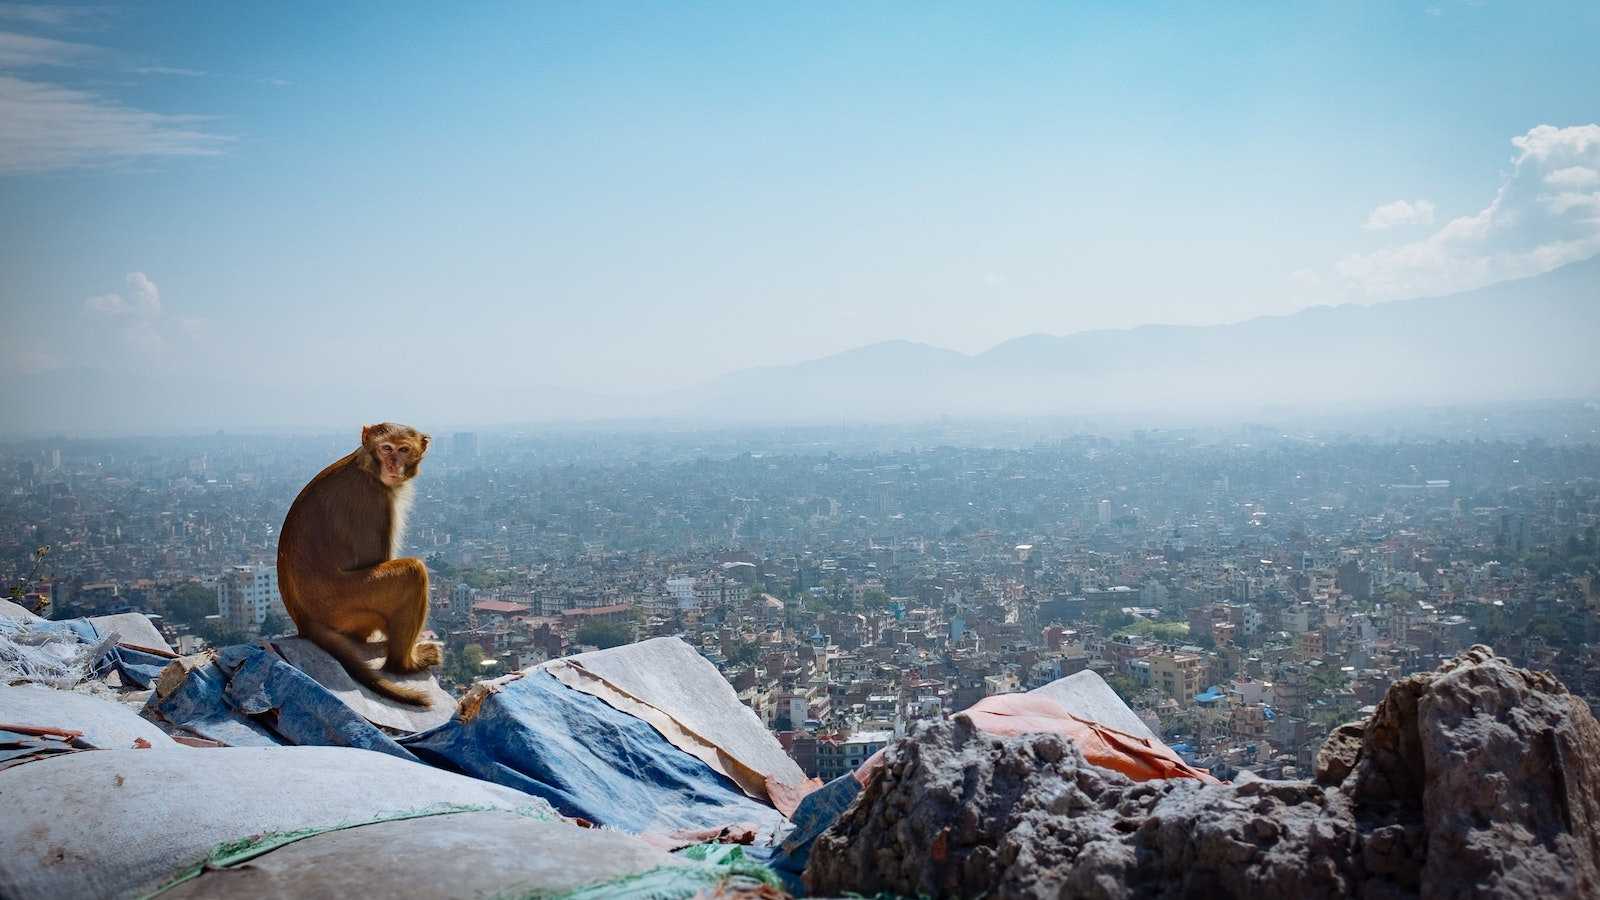 Pretty monkey posing for us at the Swayambhunath Temple in Nepal.